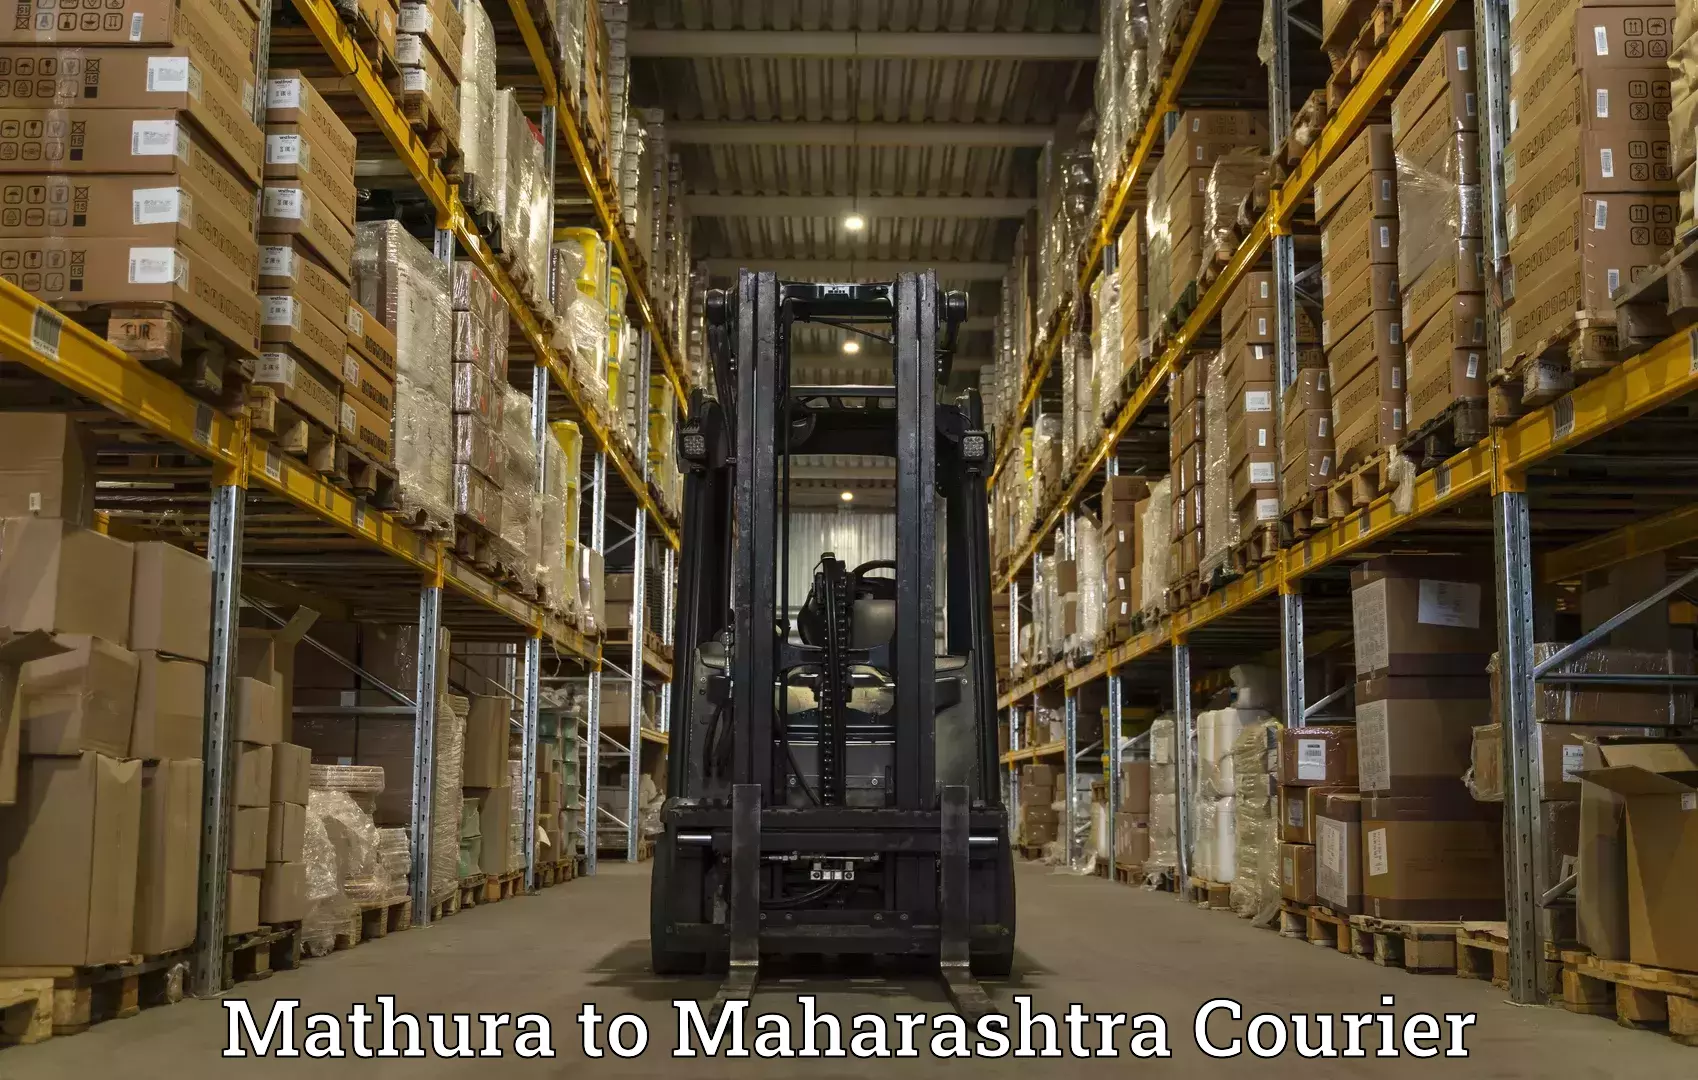 Customer-focused courier Mathura to Jamkhed